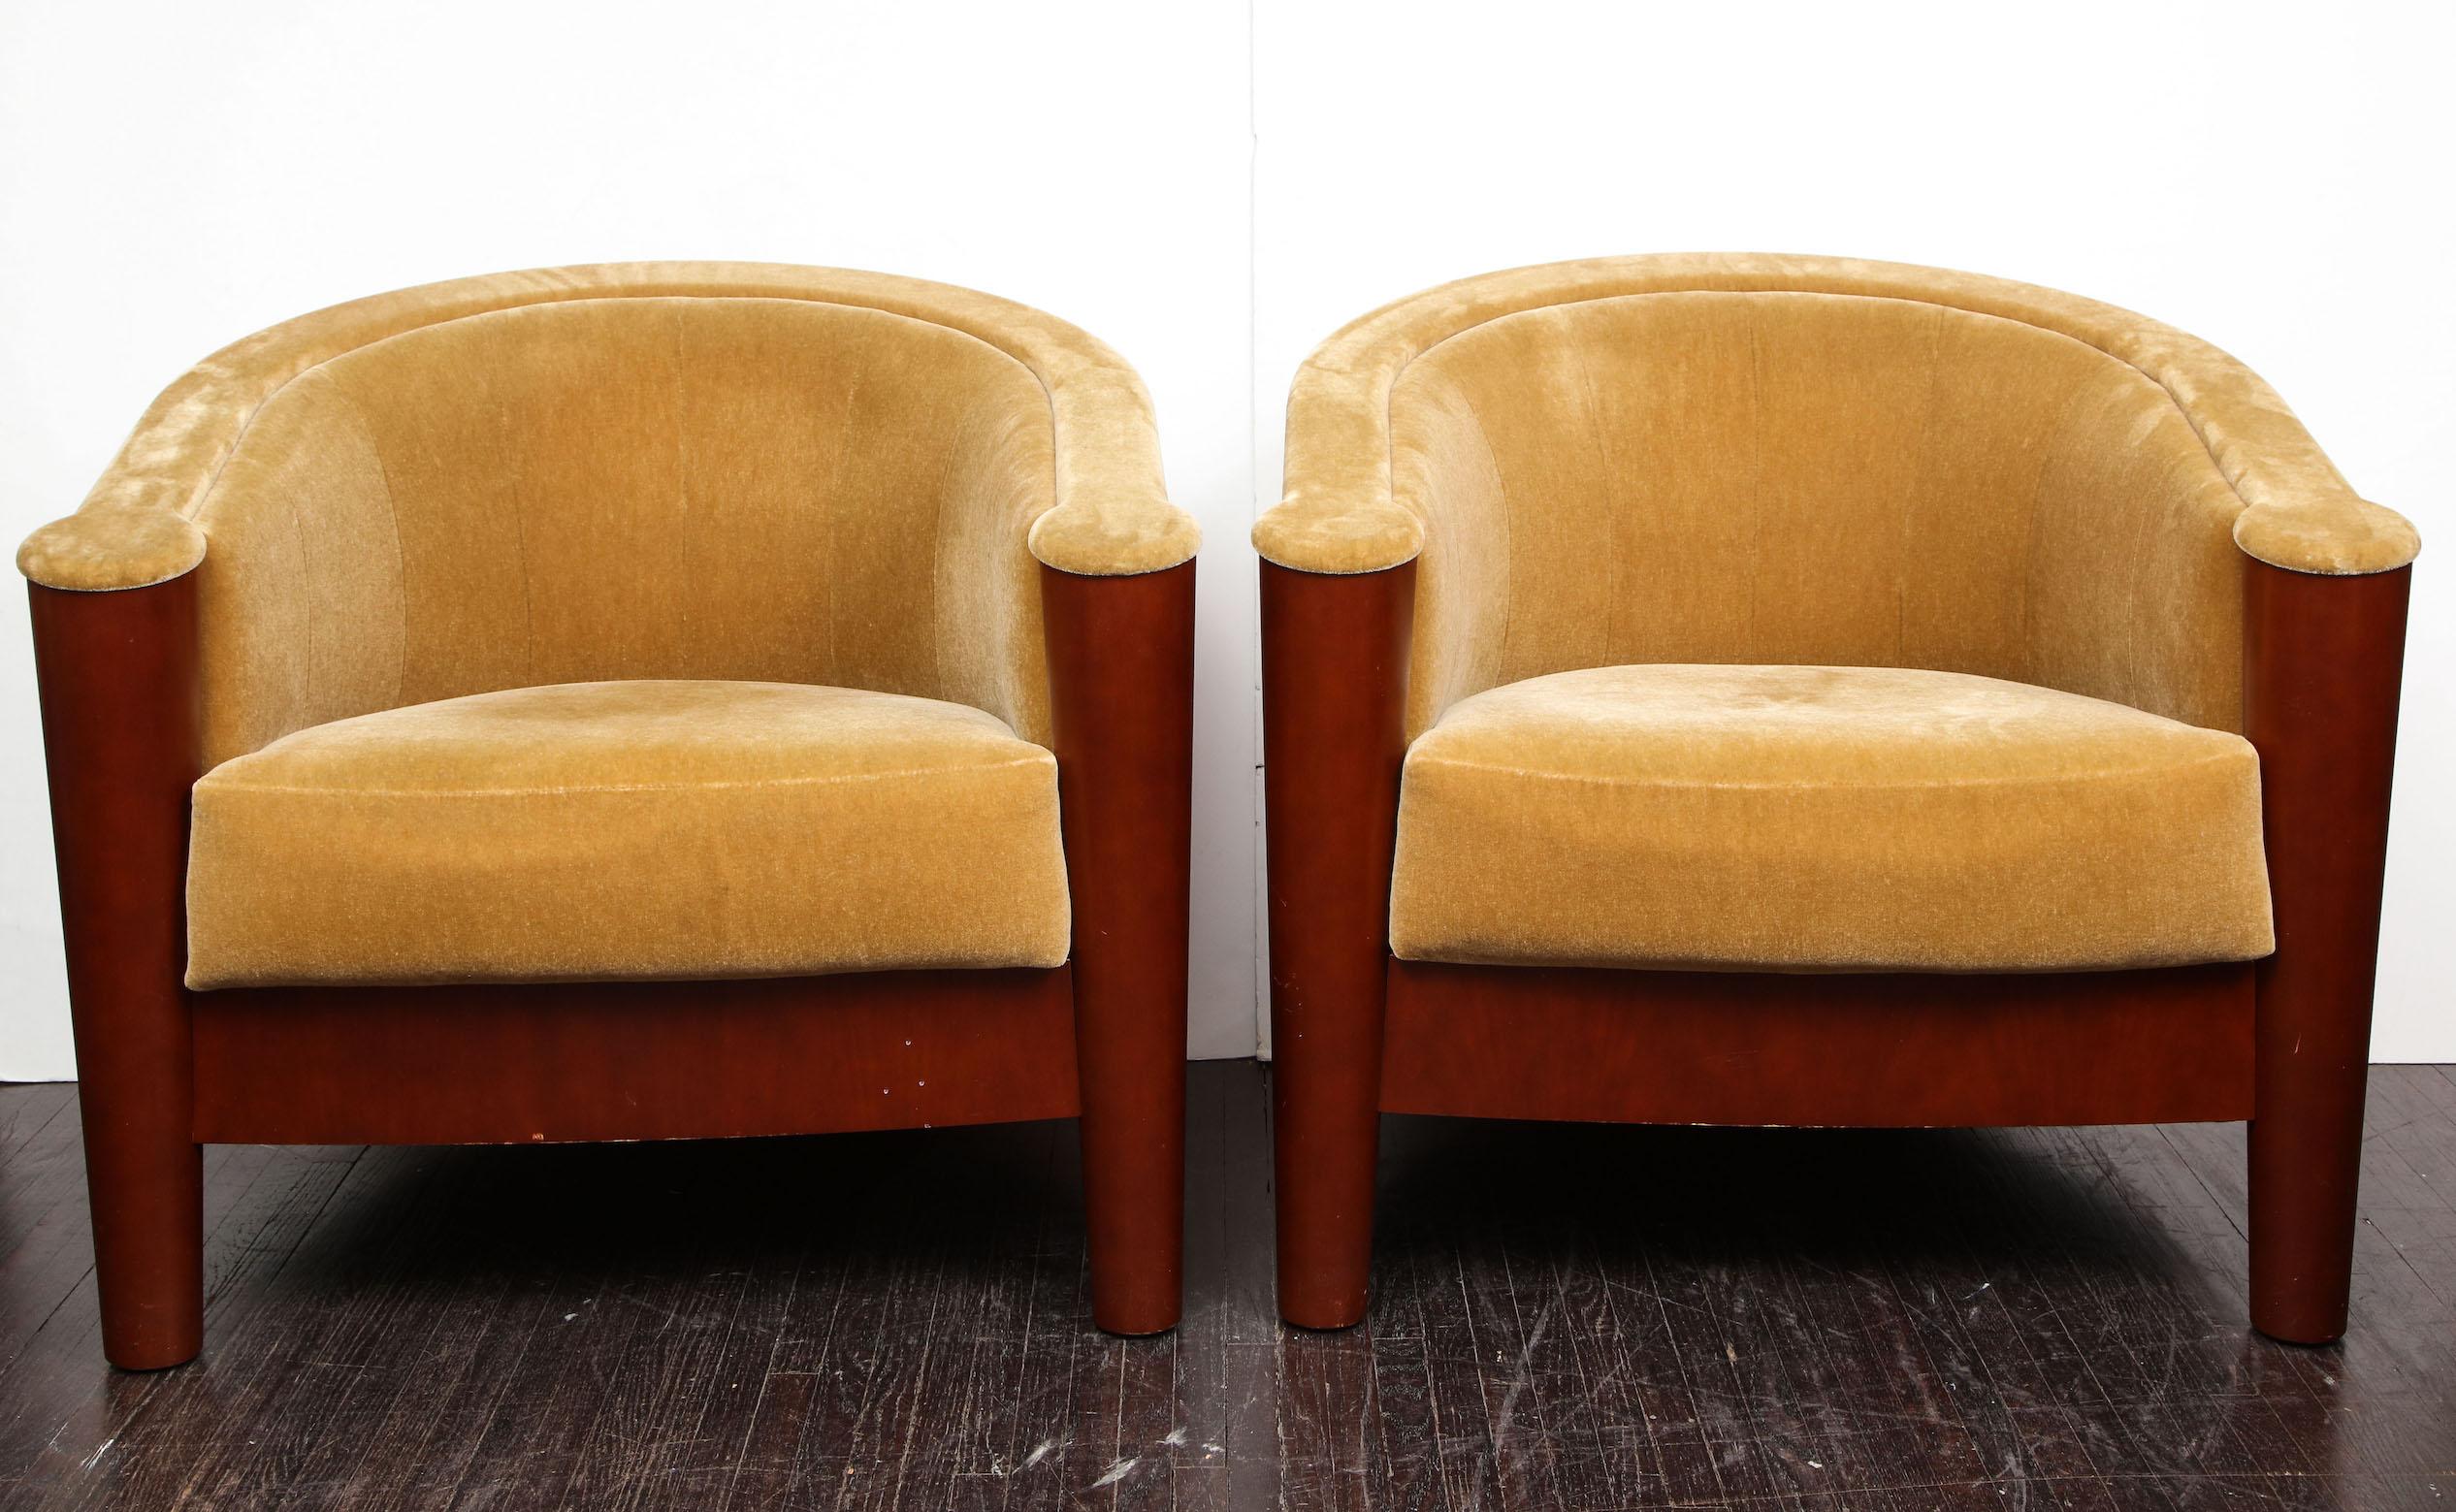 Pair of Art Deco club chairs. The seat measurements are 18